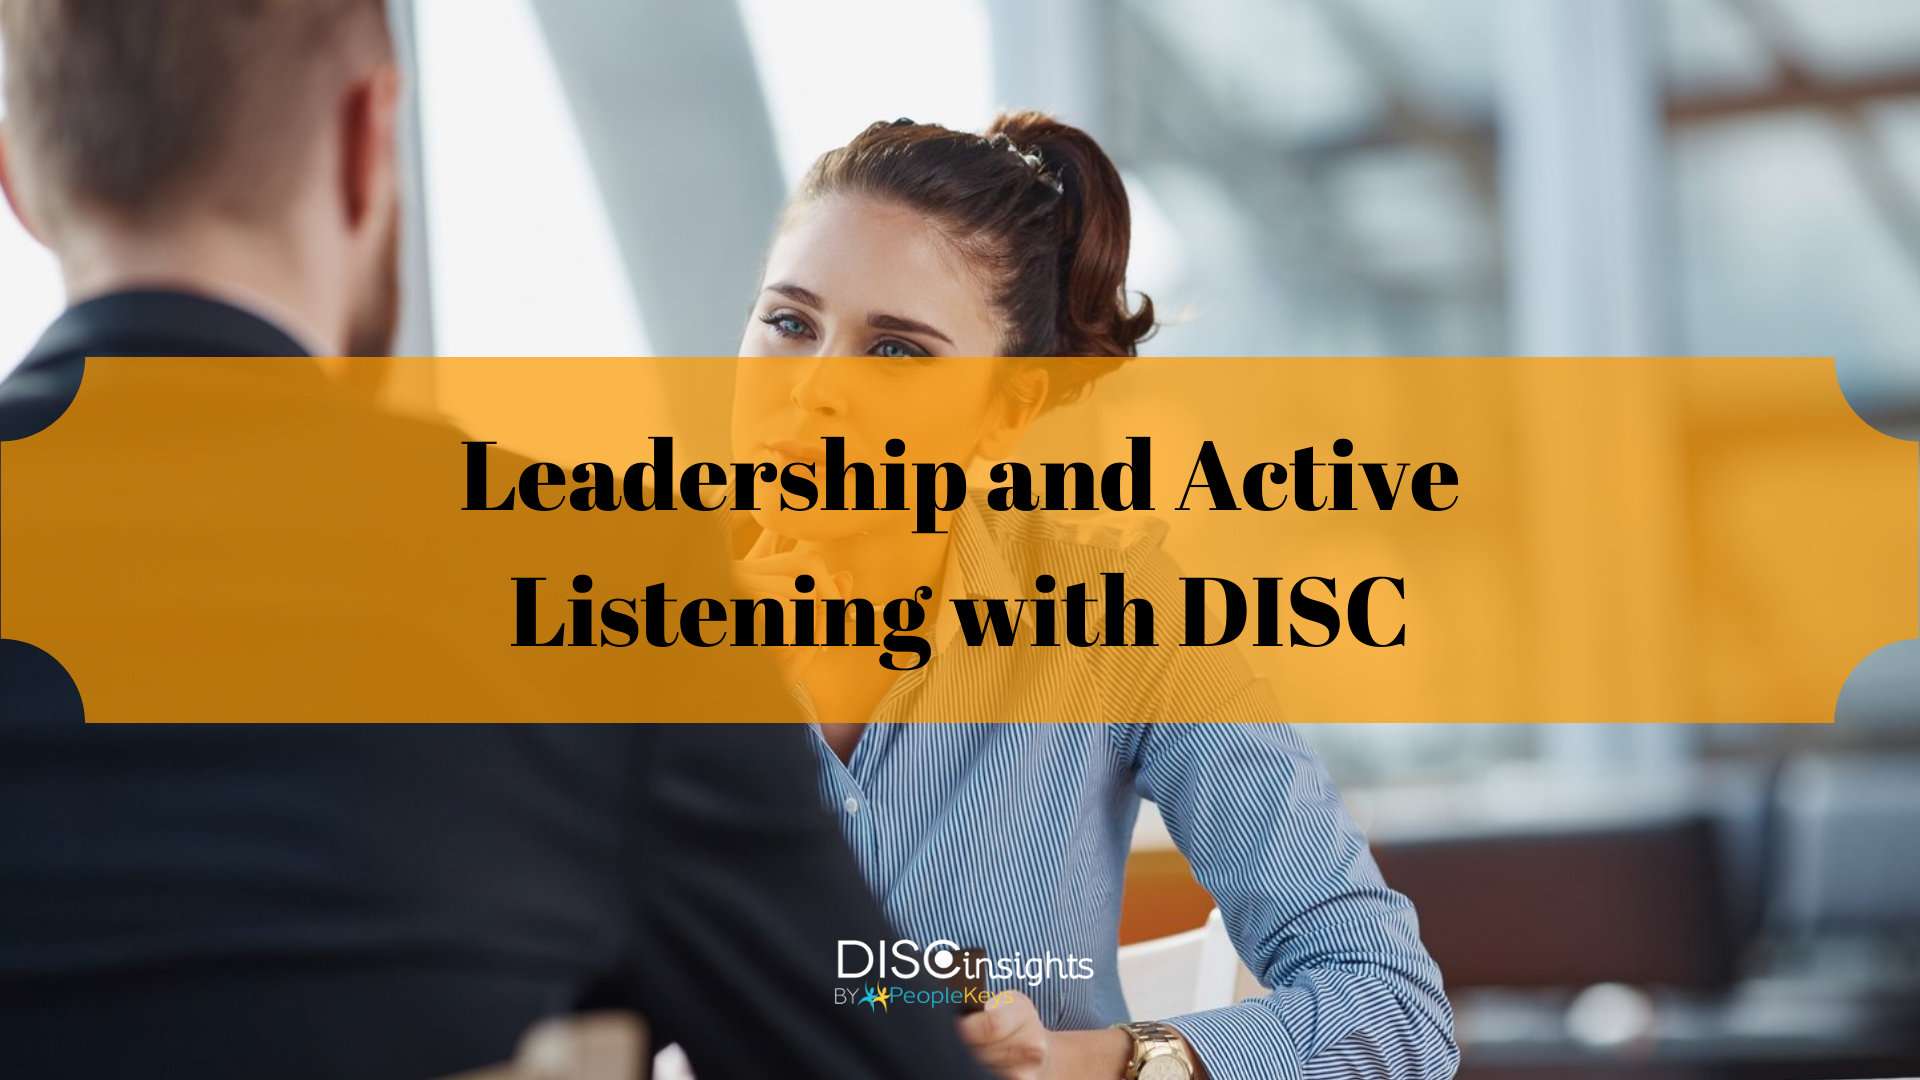 Leadership and active listening with DISC